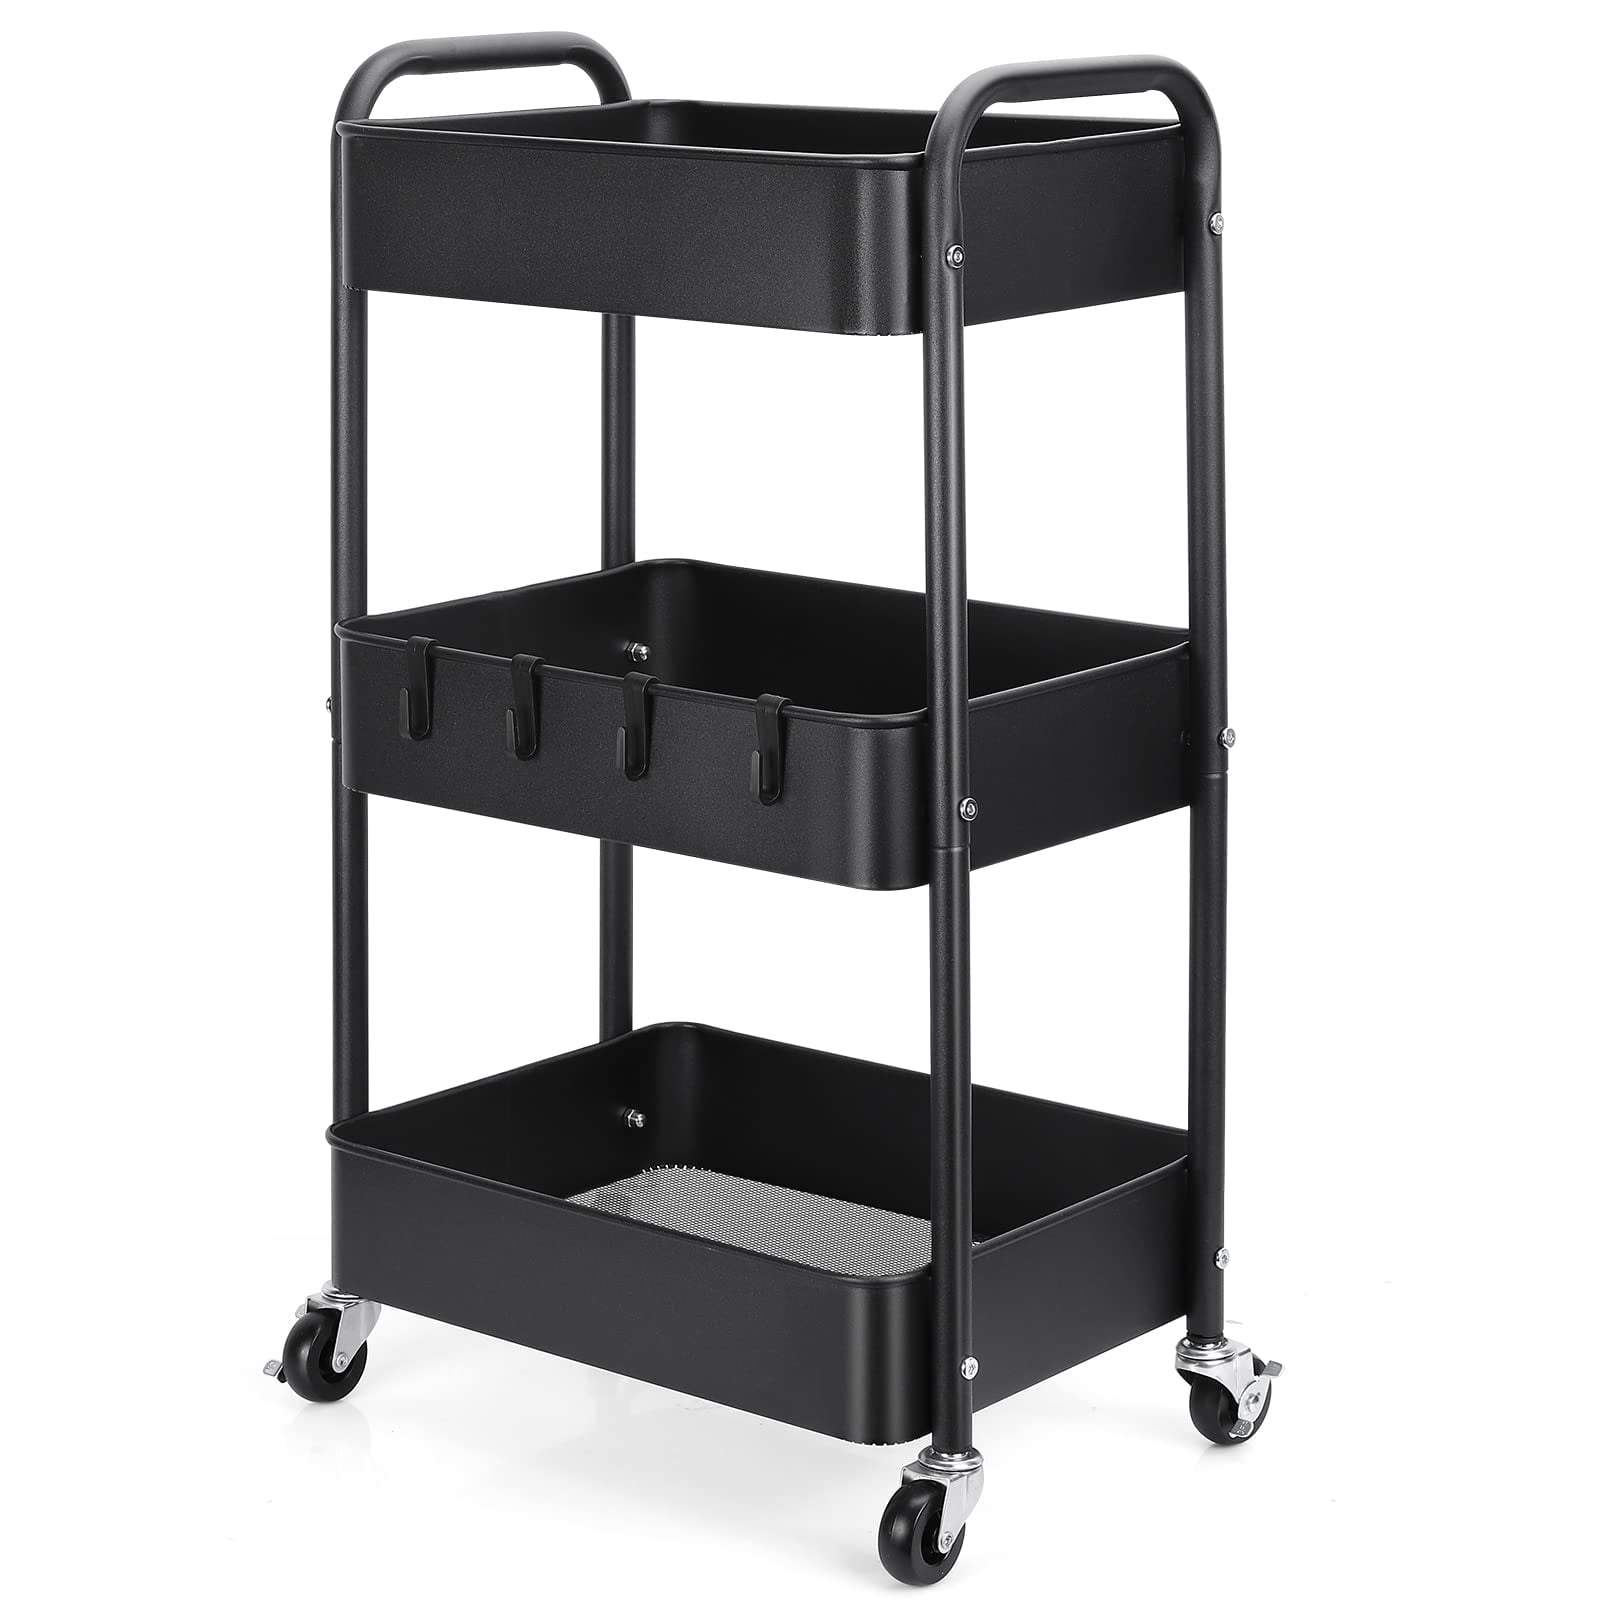 Bedroom Easy Assembly Organizer Storage Cart for Bathroom Kitchen Metal Trolley Cart with Wheels Hooks Office Black LEHOM 3 Tier Rolling Utility Cart 